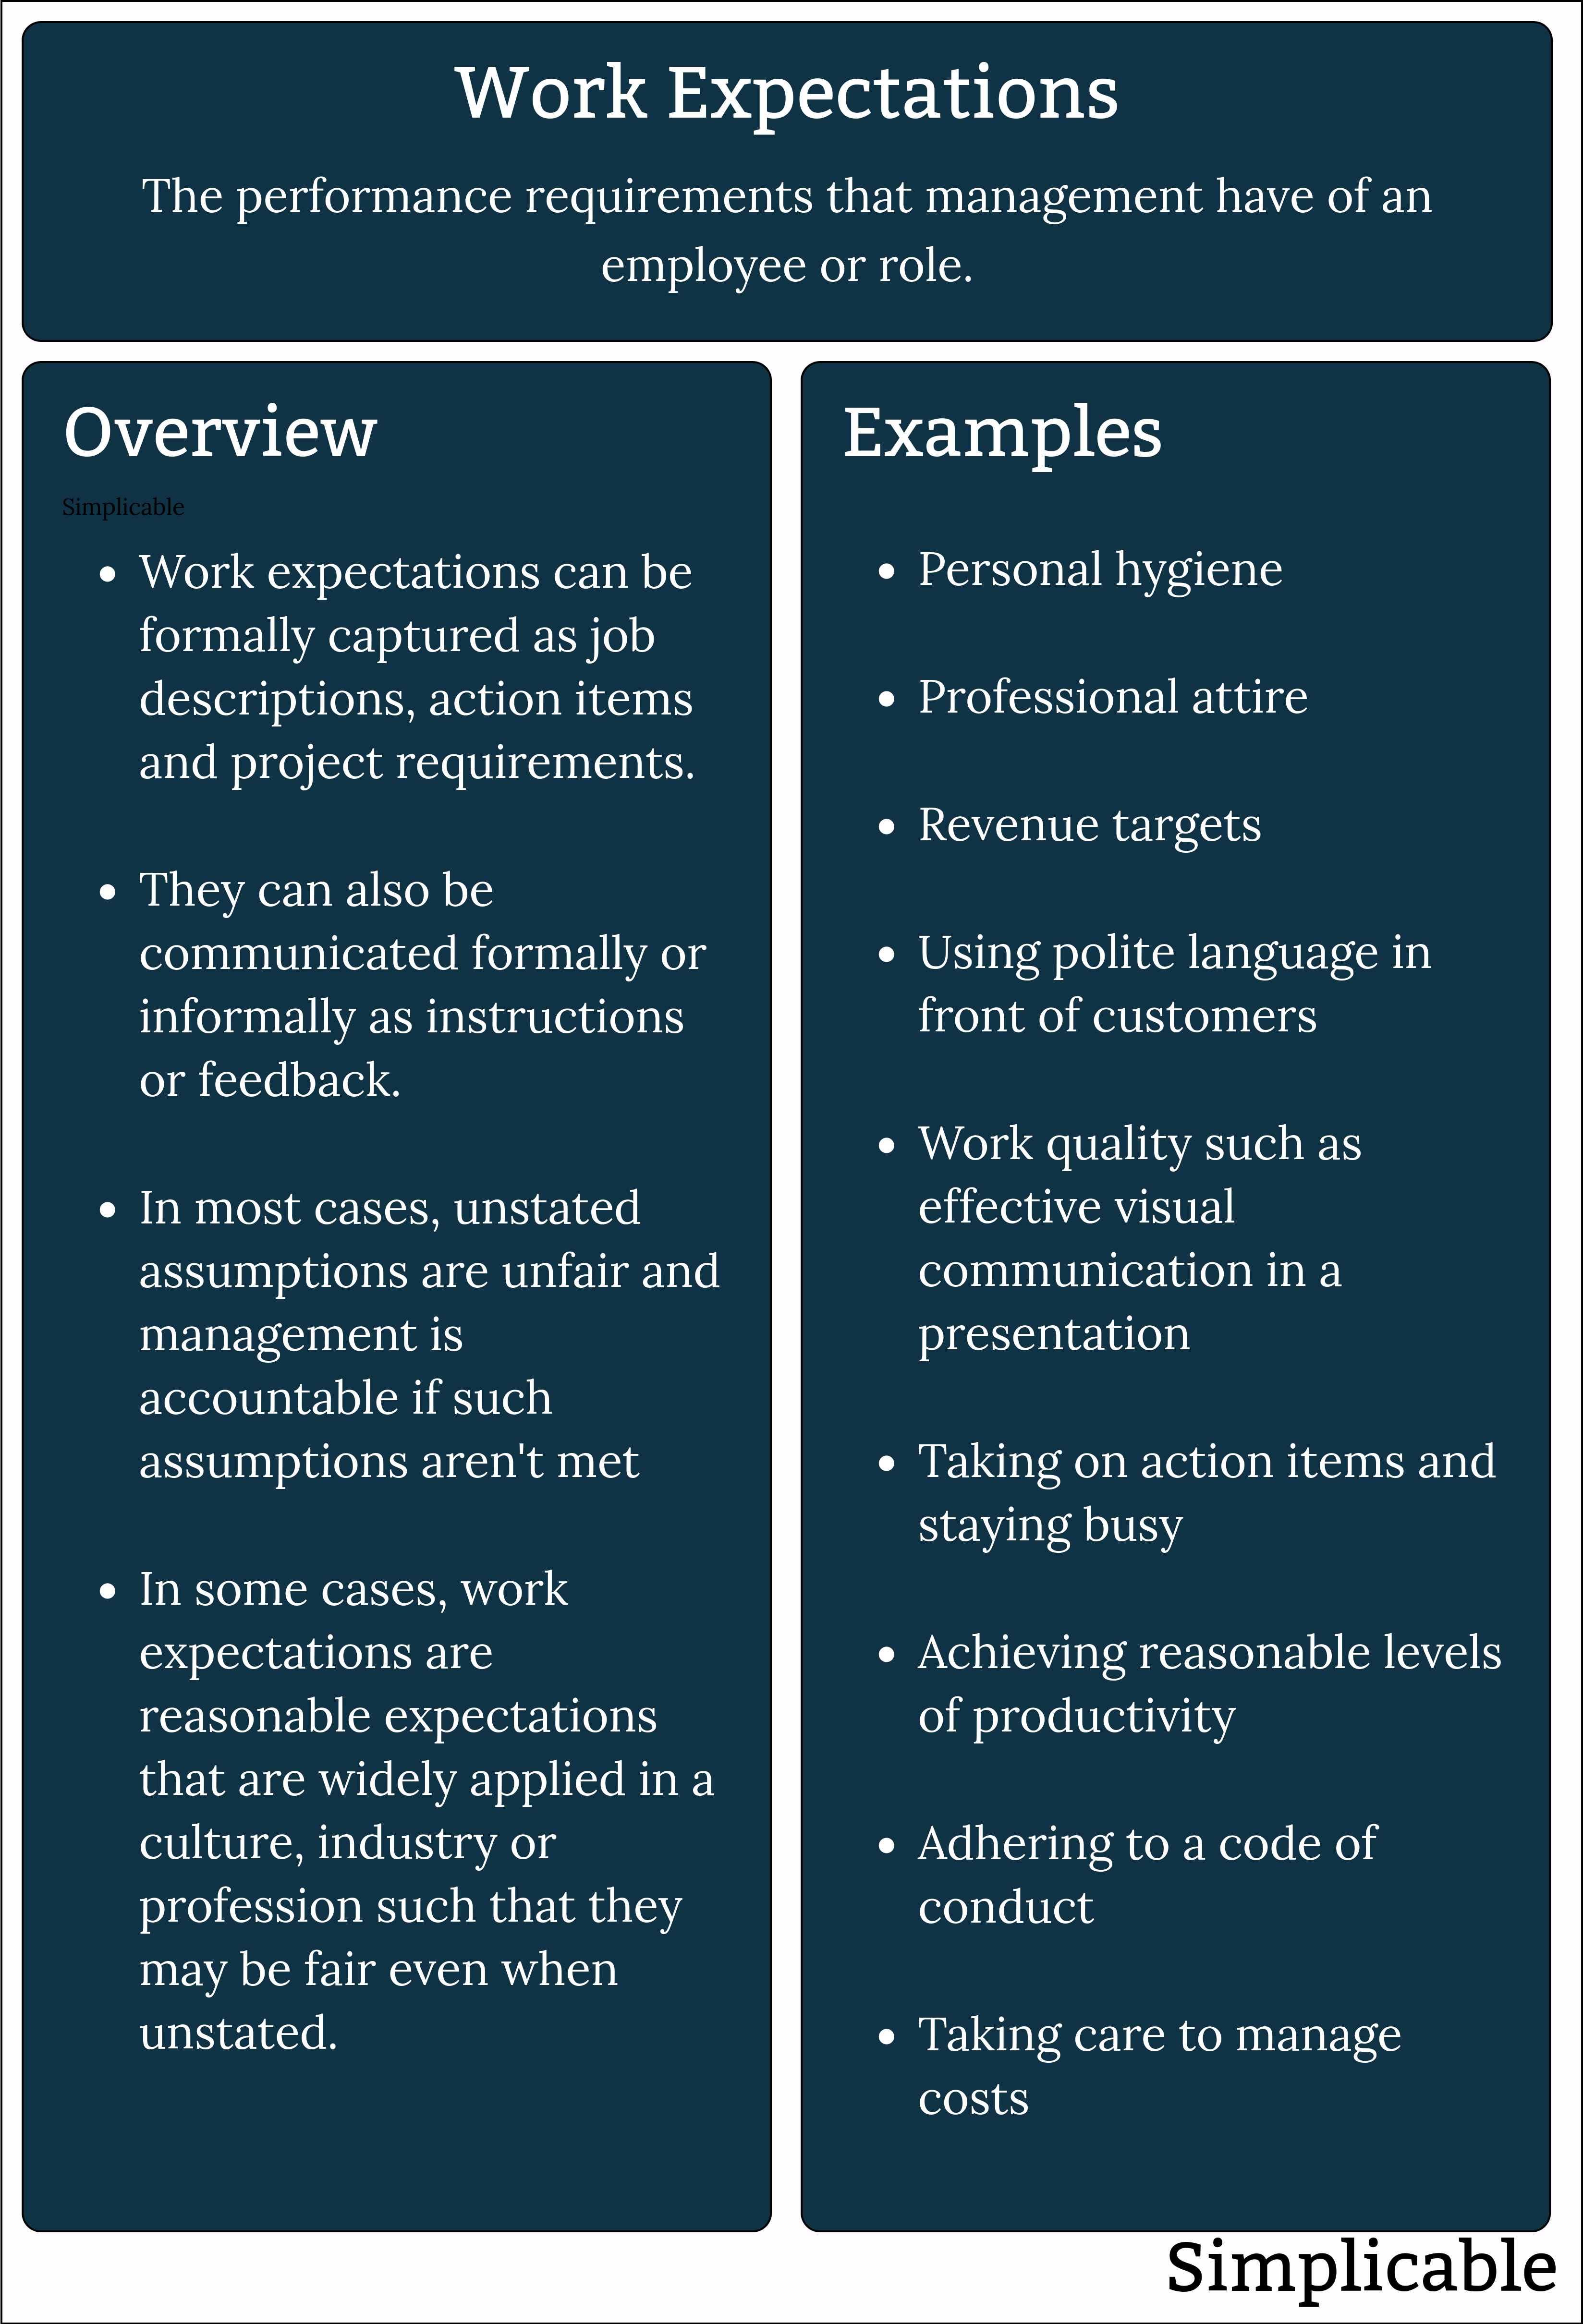 work expectations overview and examples